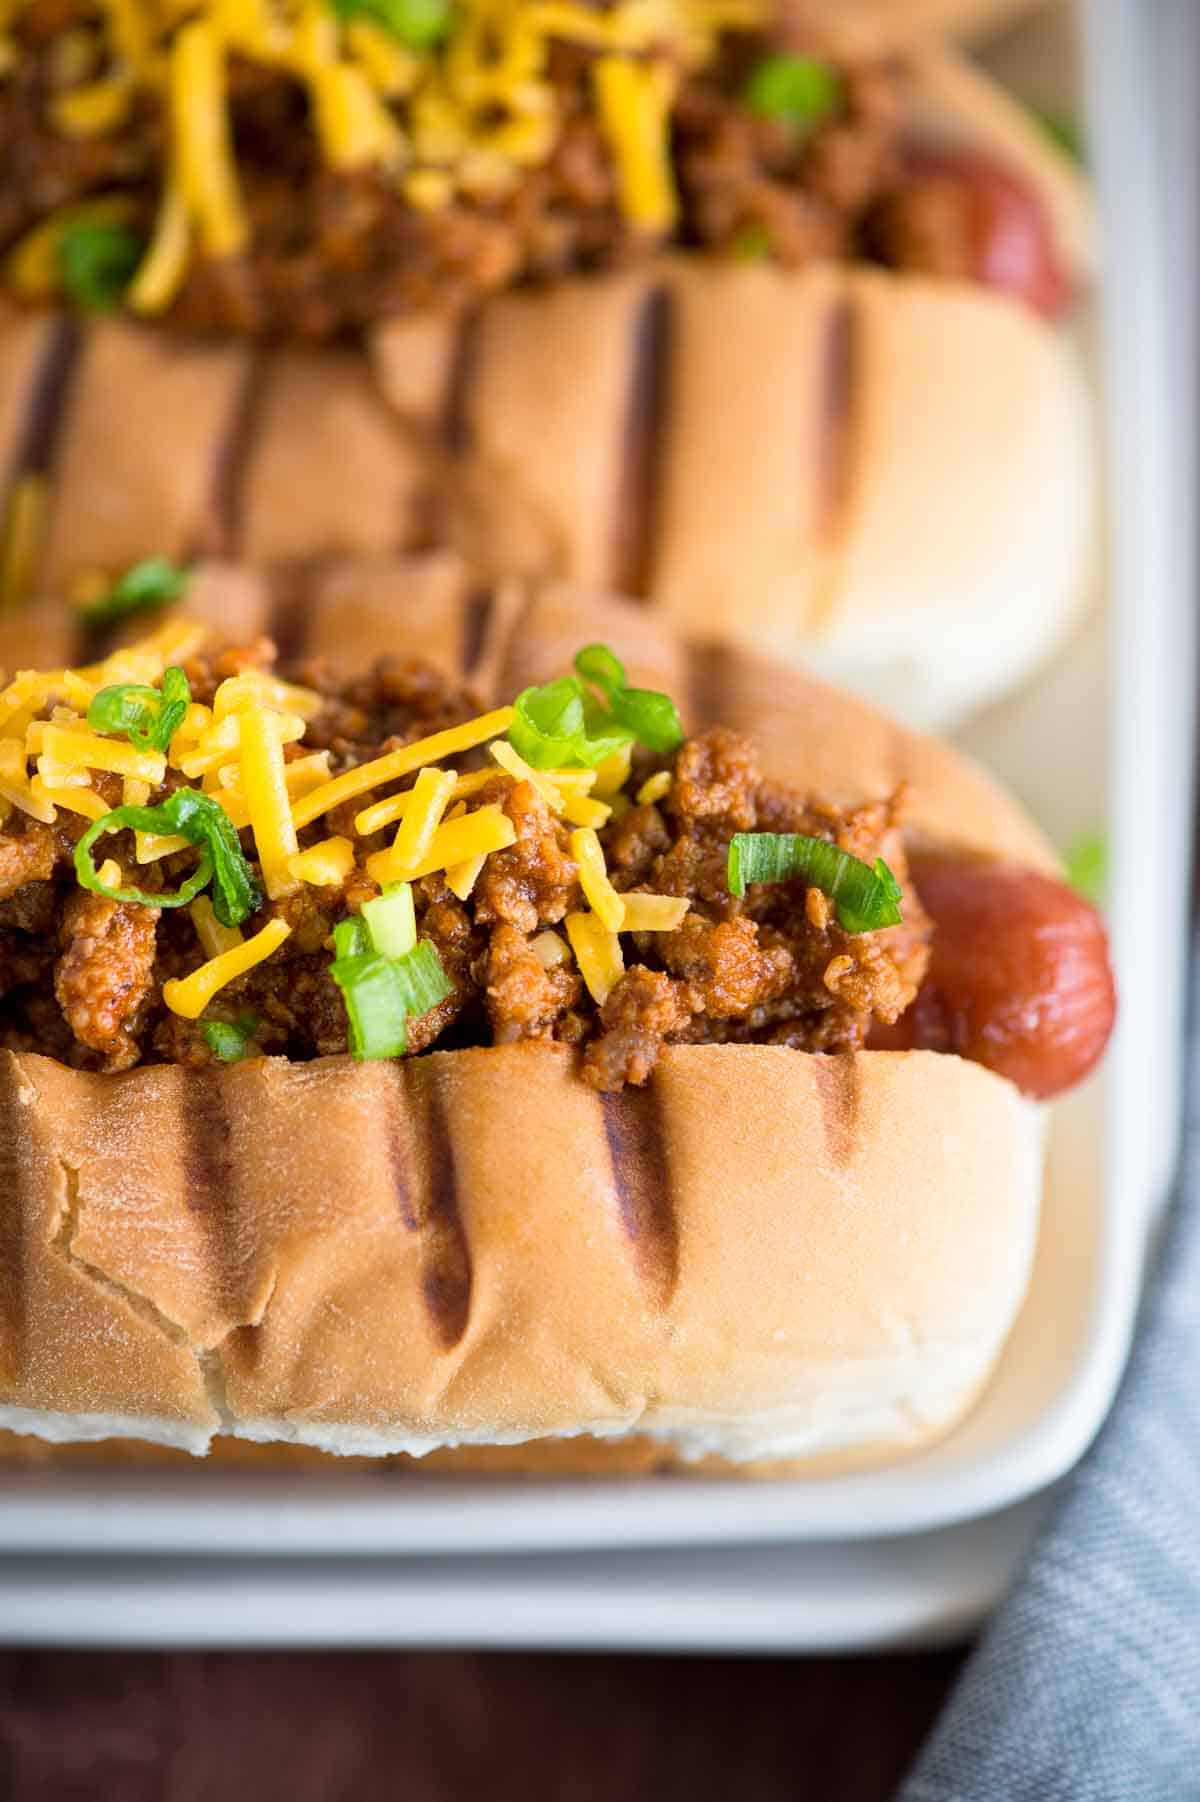 two hot dogs with chili meat sauce and cheese